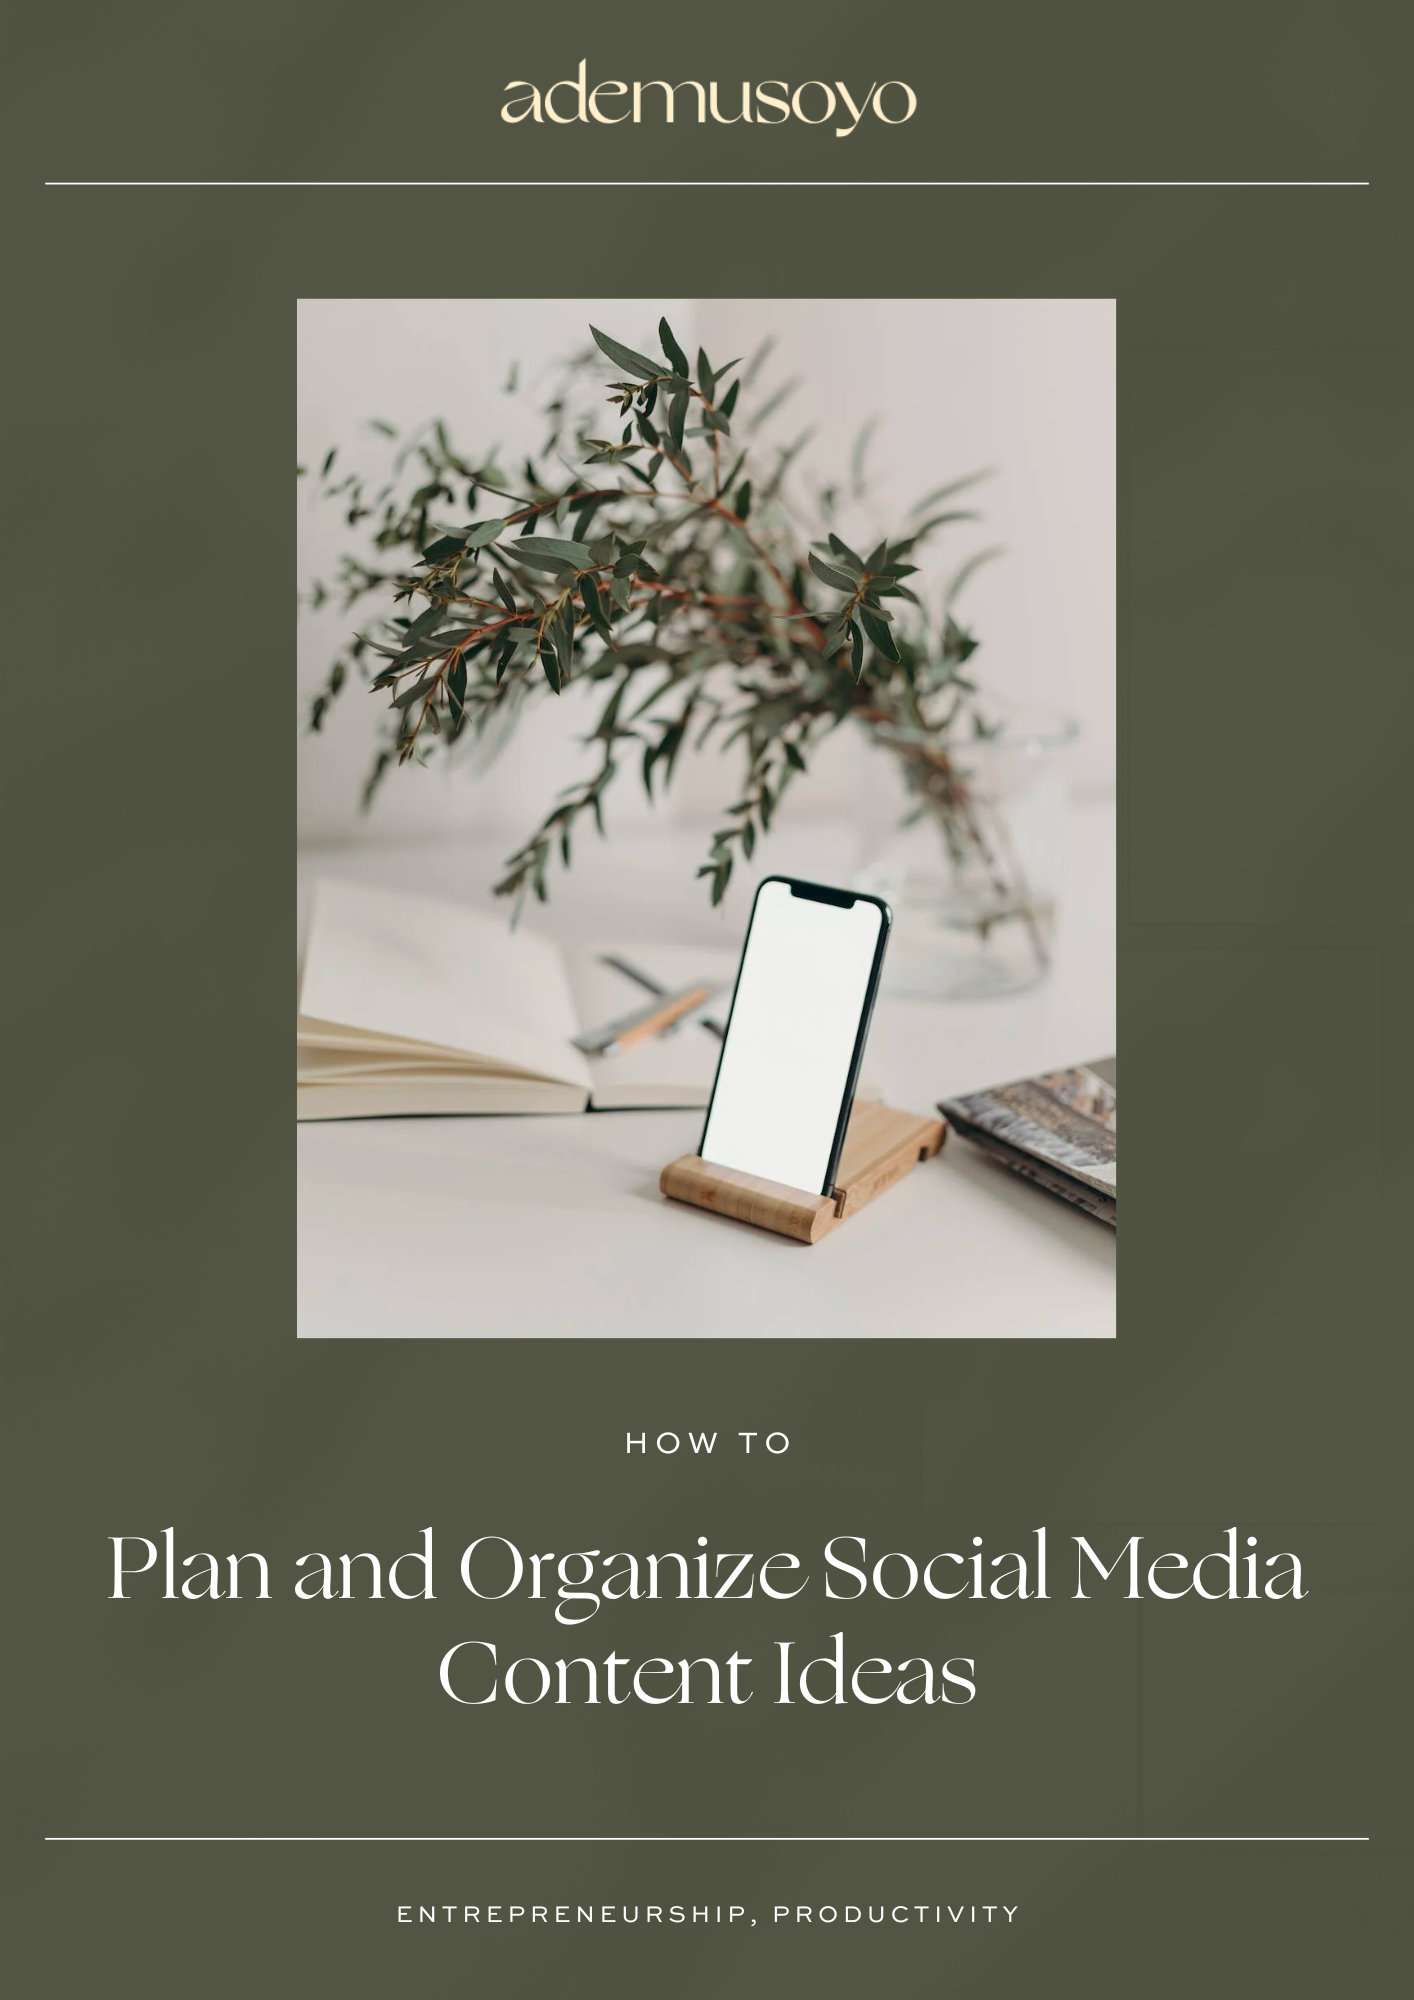 How to Plan and Organize Social Media Content Ideas